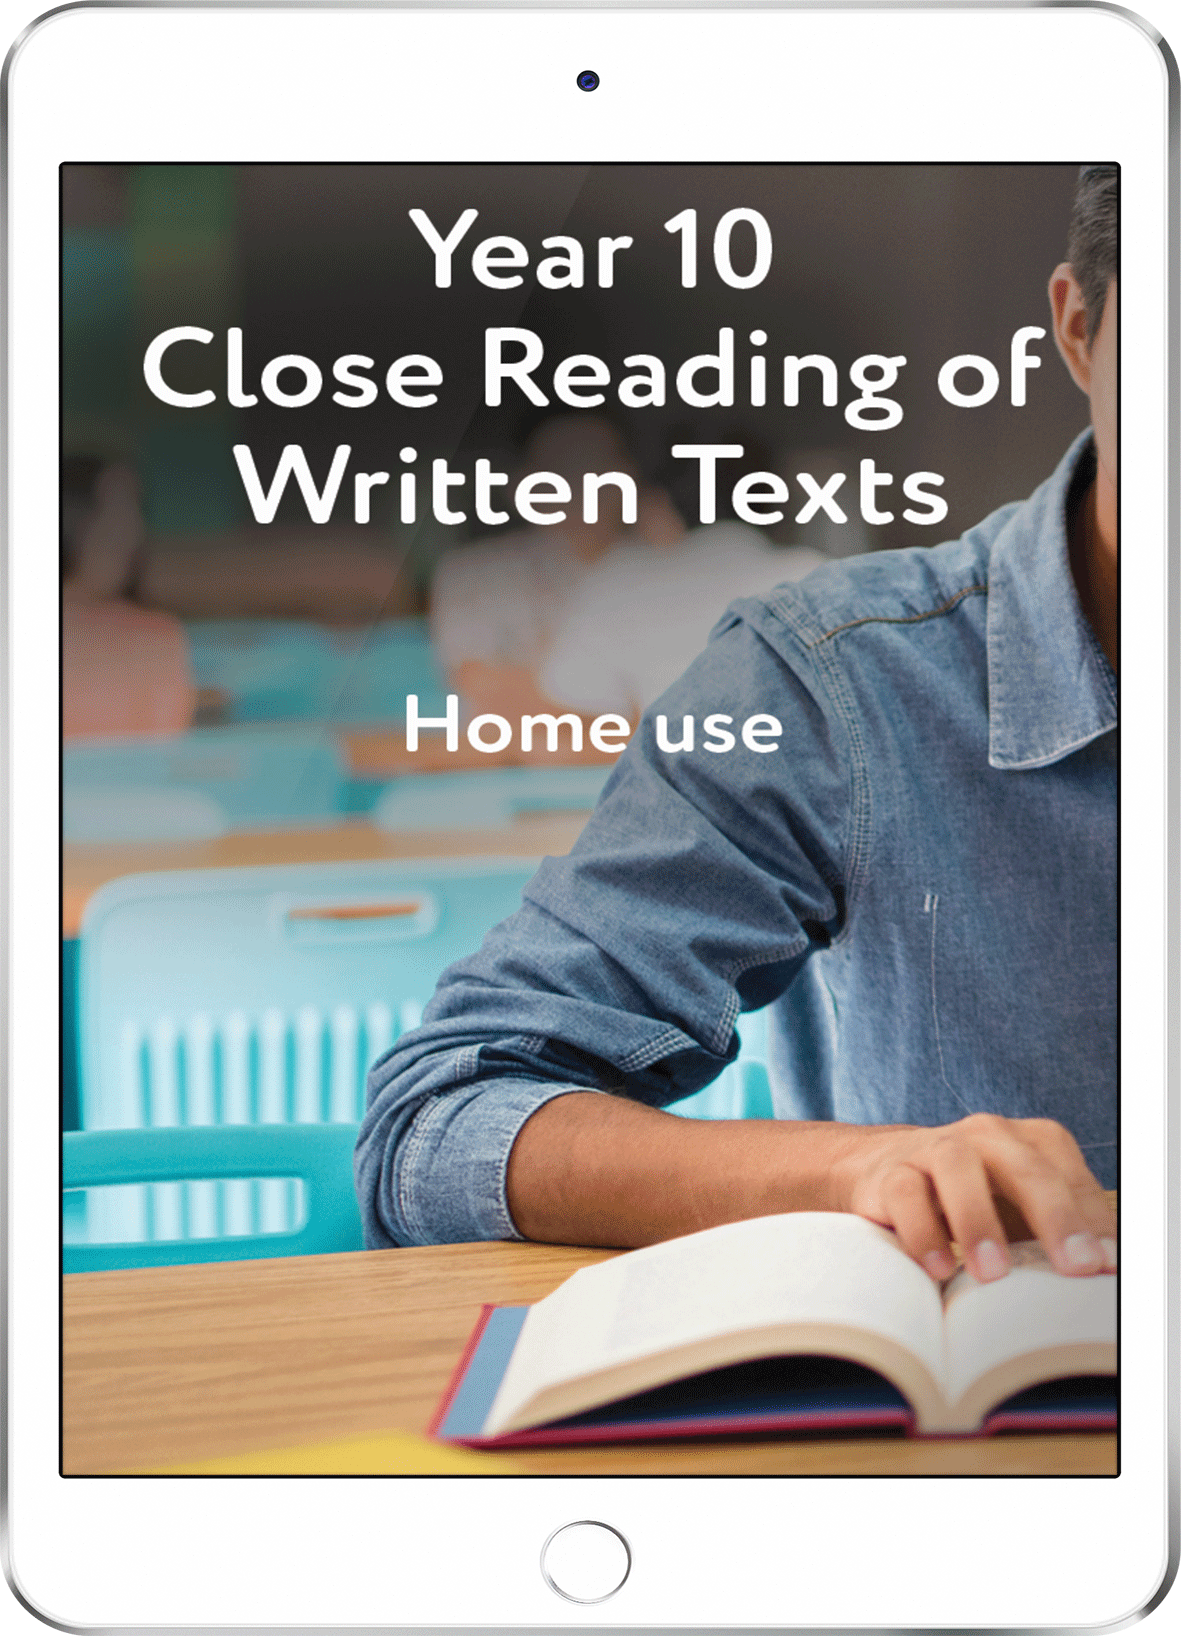 Year 10 Close Reading of Written Texts - Home Use